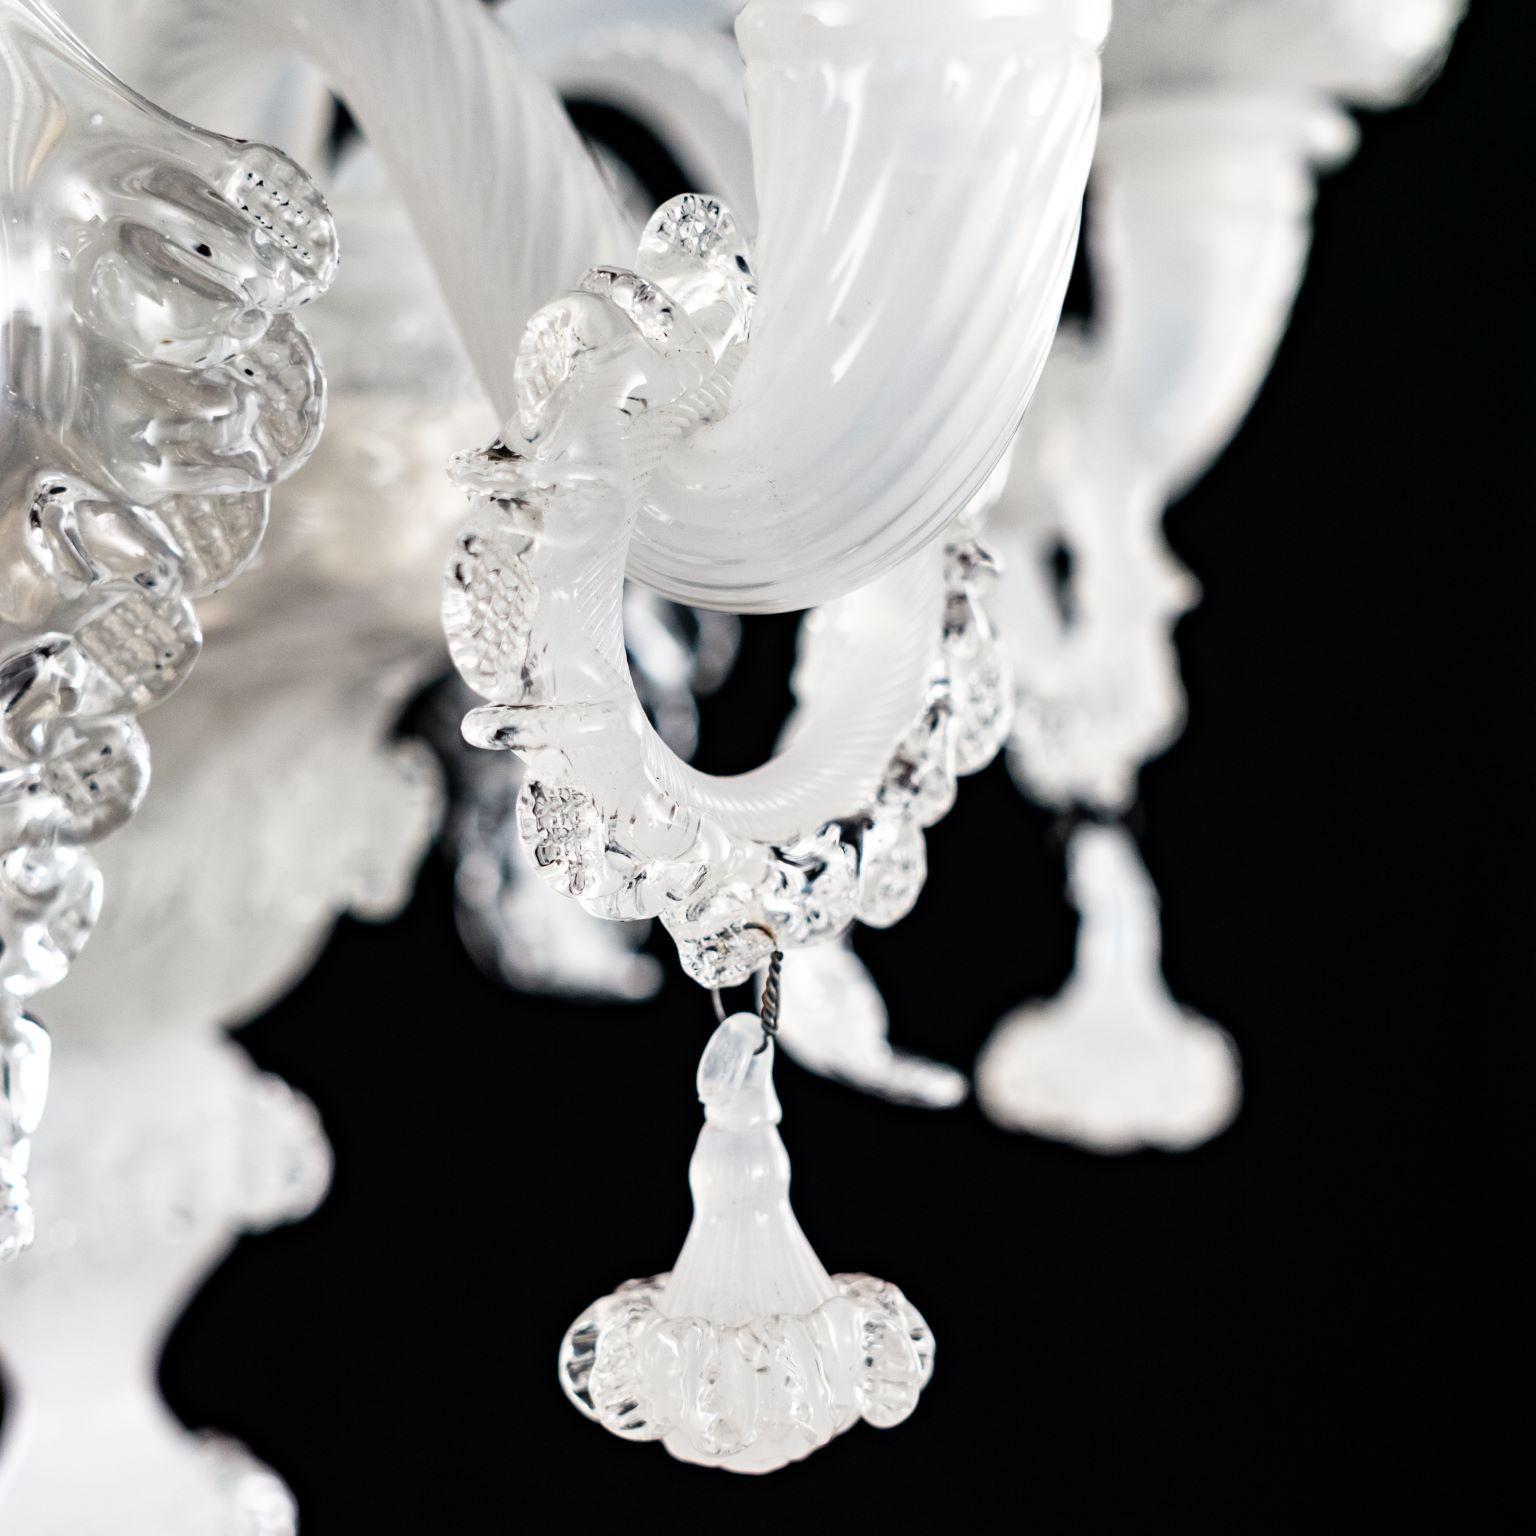 The peculiar characteristic of the Galliano lighting collection is the richness of its decorations.
This artistic glass chandelier has 5-lights, is handmade in white silk and crystal glass.
Galliano is our tribute to the authentic Murano glass